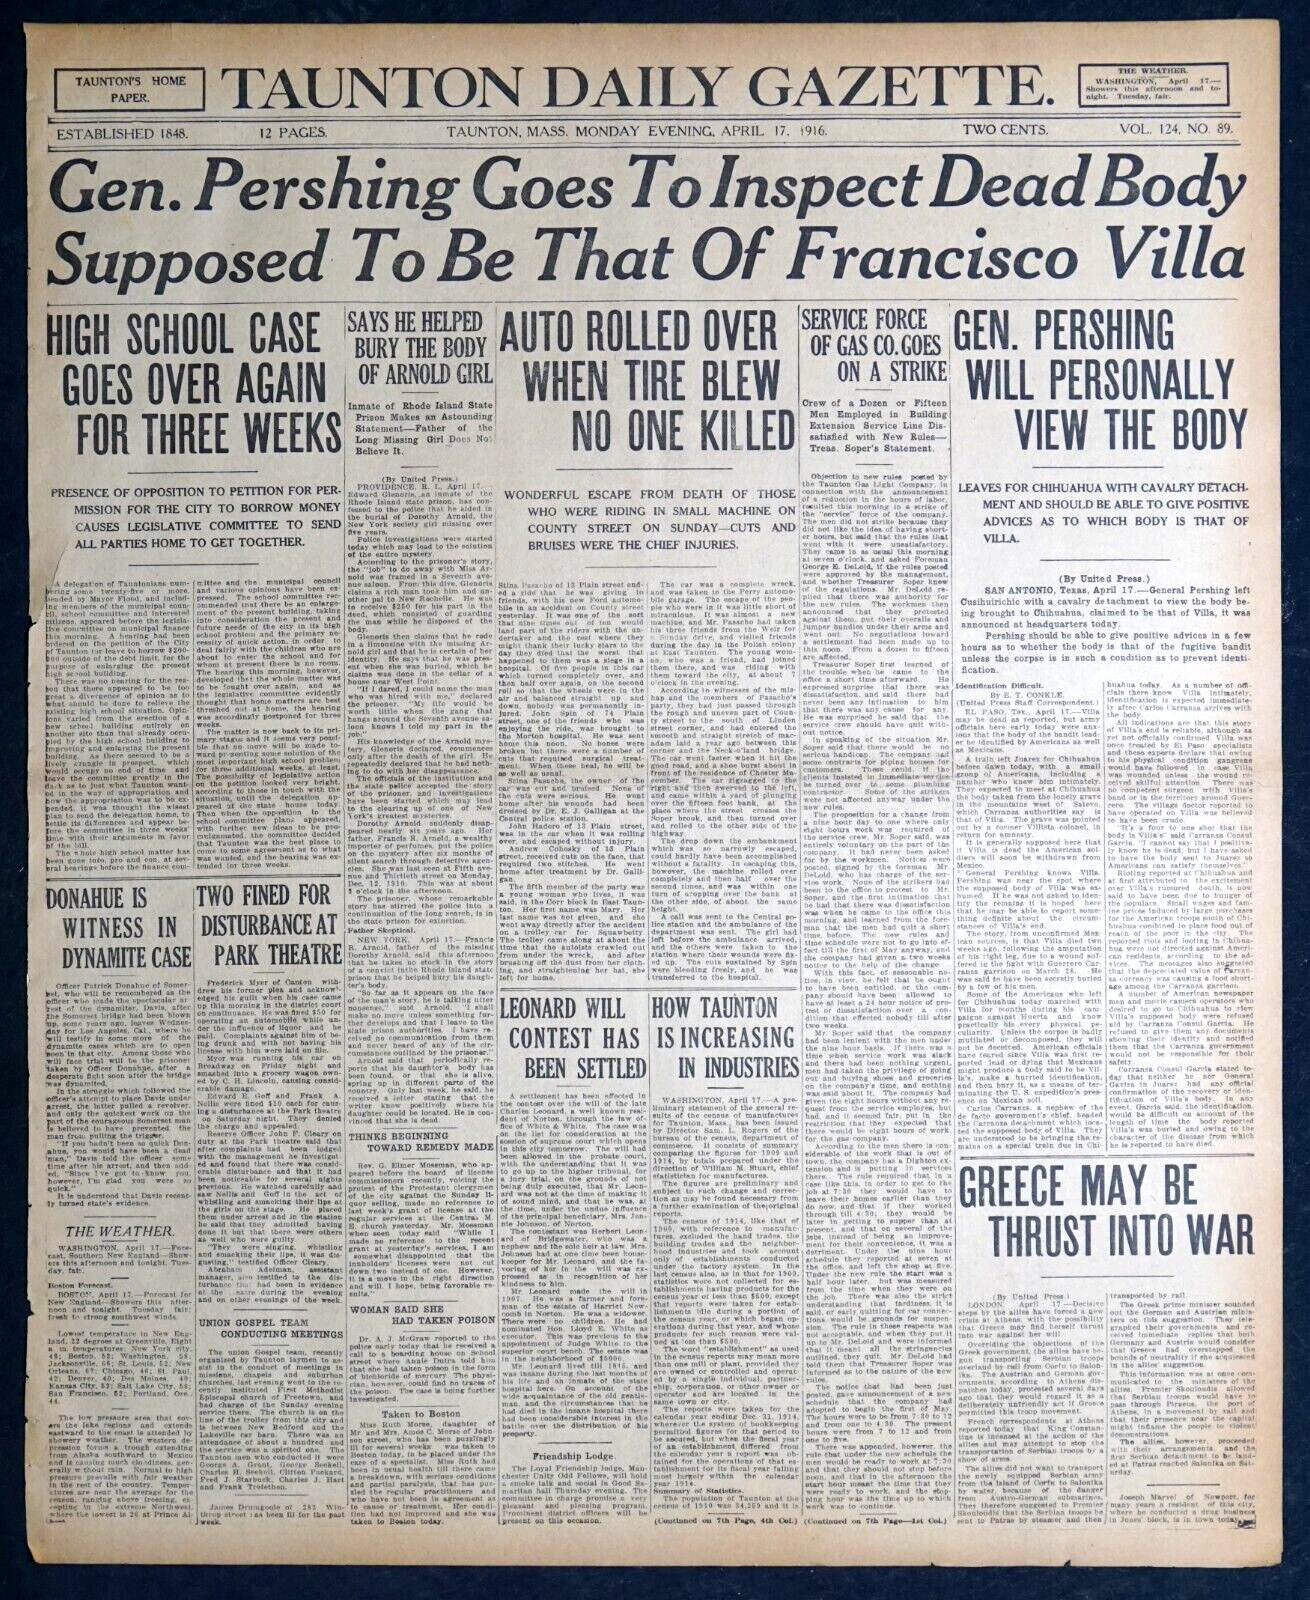 1916 Newspaper Front Page - Pershing to Inspect Supposed Pancho Villa Dead Body